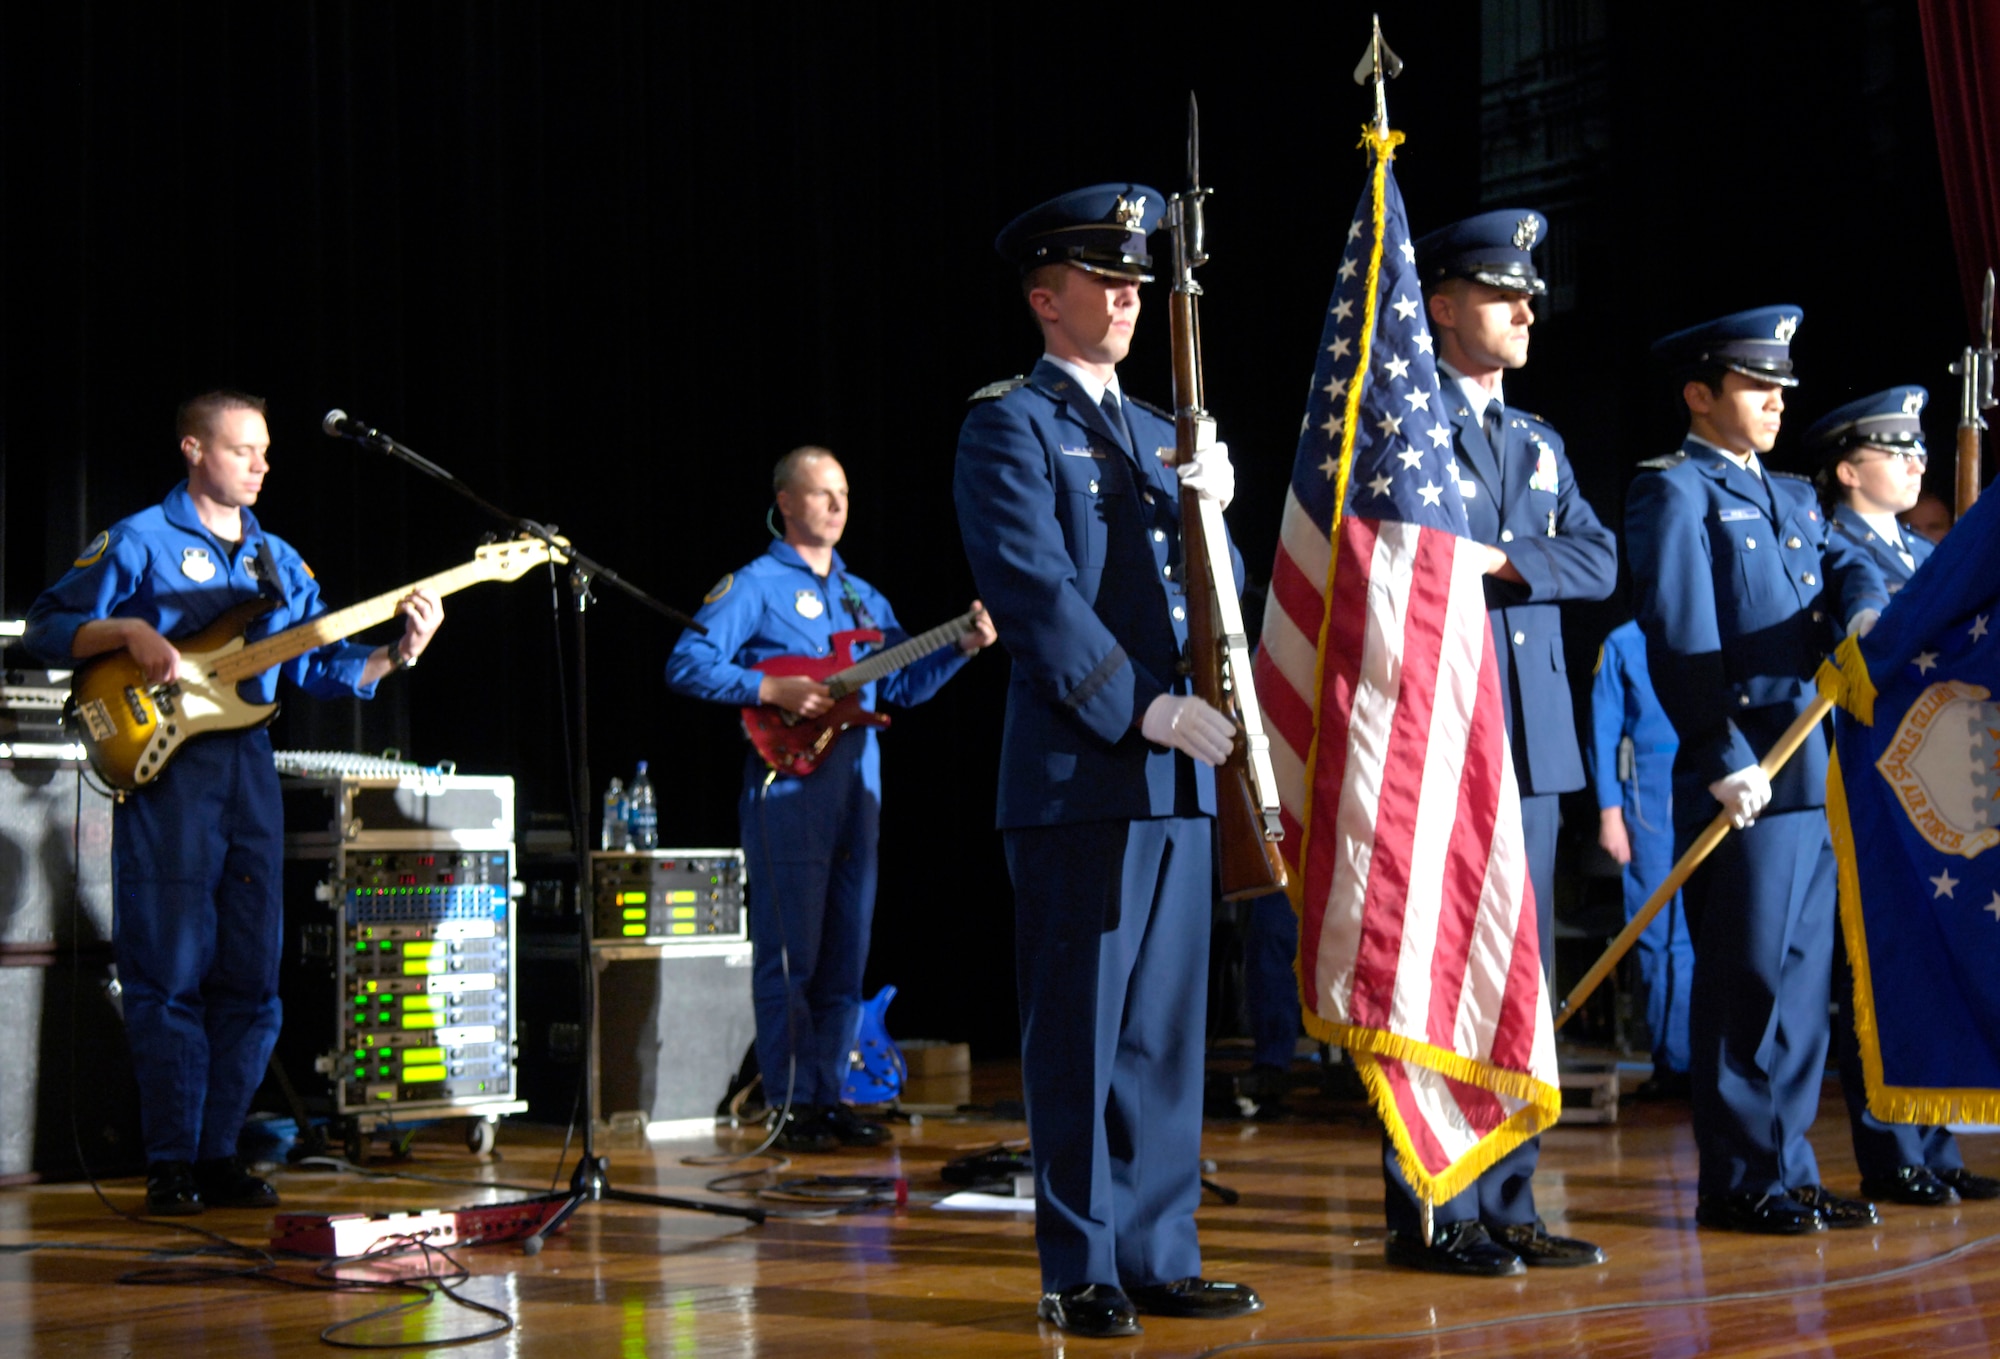 The U.S. Air Force Academy Honor Guard present the colors at Mamaroneck High School in New York, Nov. 22 as the Academy's band, Blue Steel, plays the National Anthem. Blue Steel performed a concert at the school as part of week-long events in New York celebrating the Air Force's 60th Anniversary.  The band will also perform in the Macy's Thanksgiving Day Parade and make an appearance on ABC's Good Morning America. (U.S. Air Force photo/Senior Airman Brian Ferguson)
